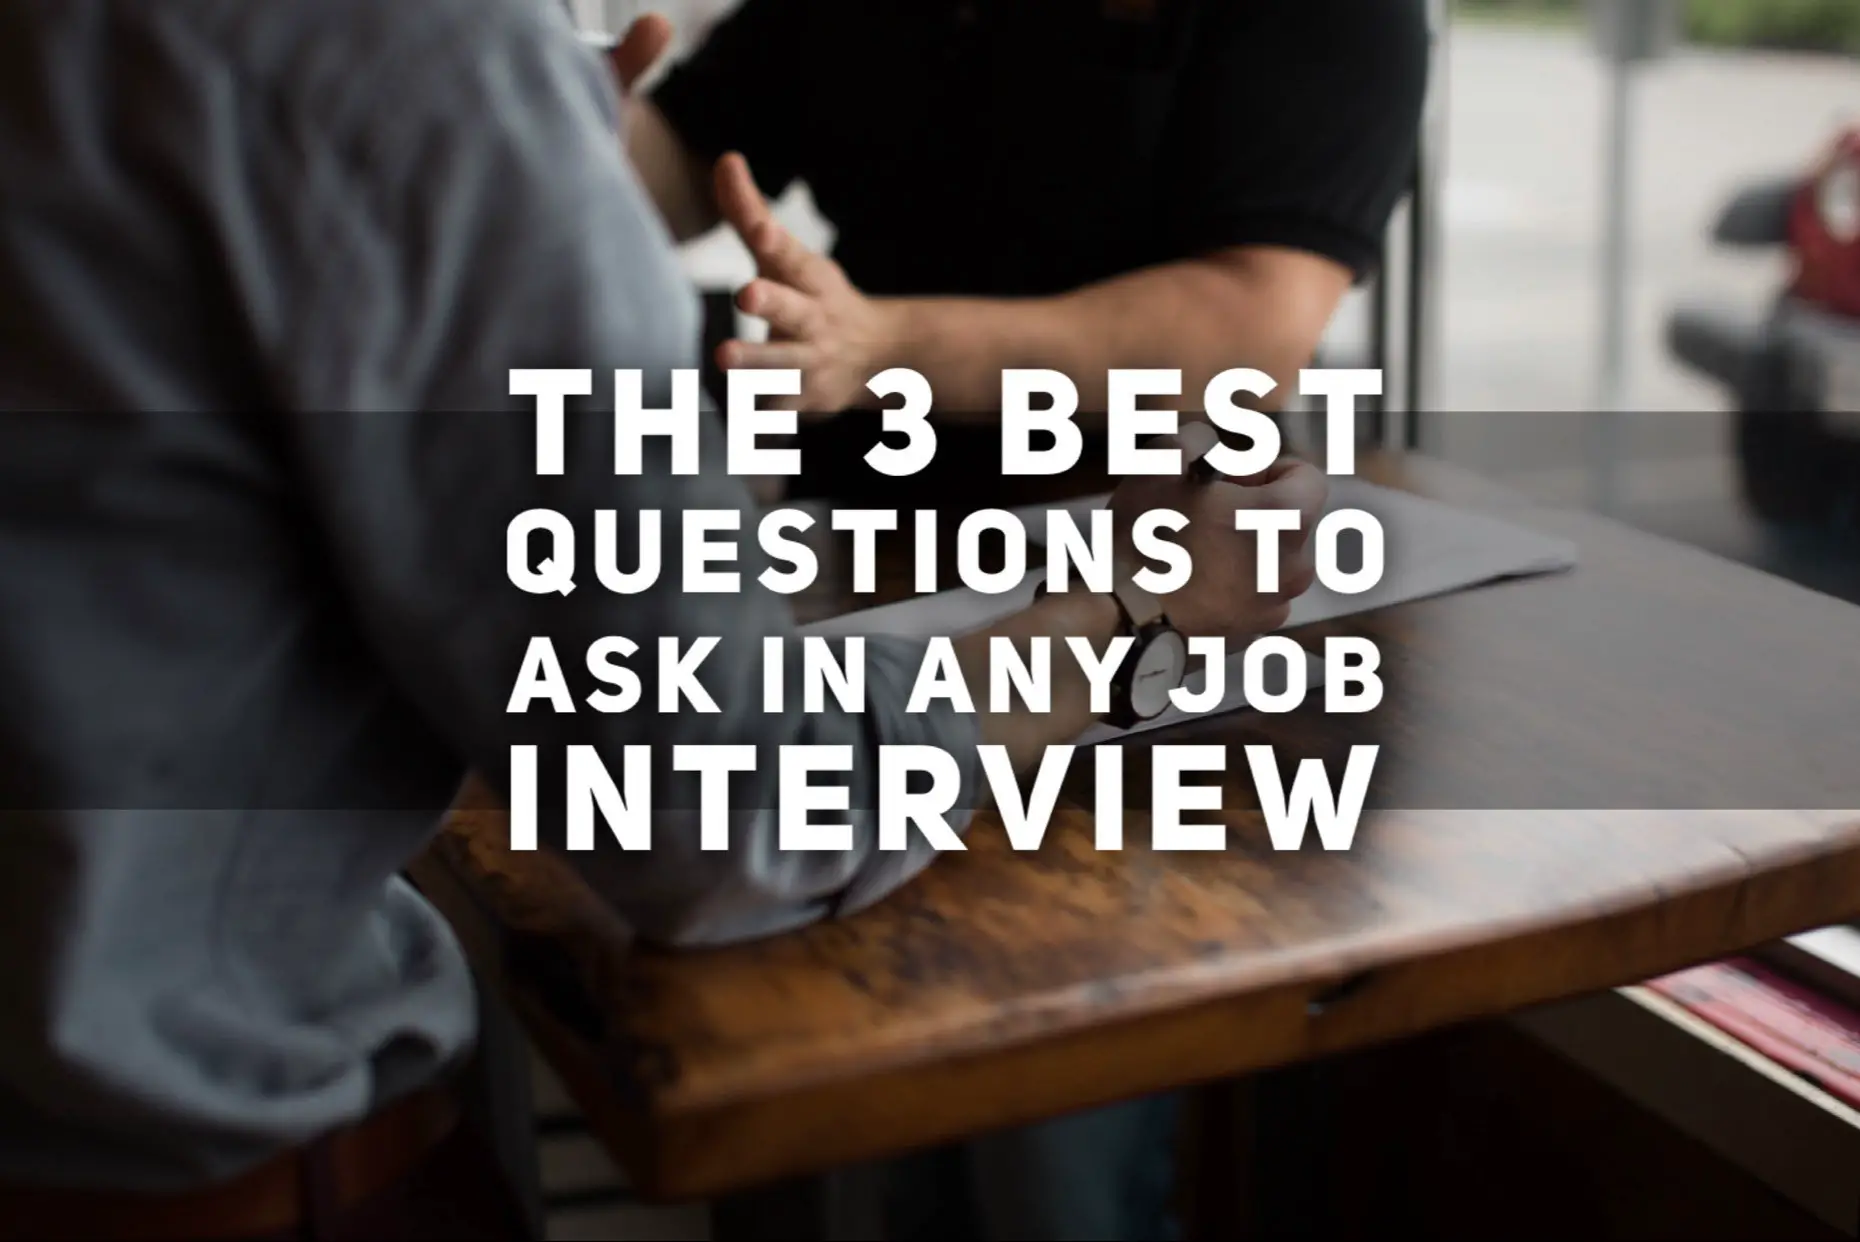 The 3 Best Questions to Ask in any Job Interview